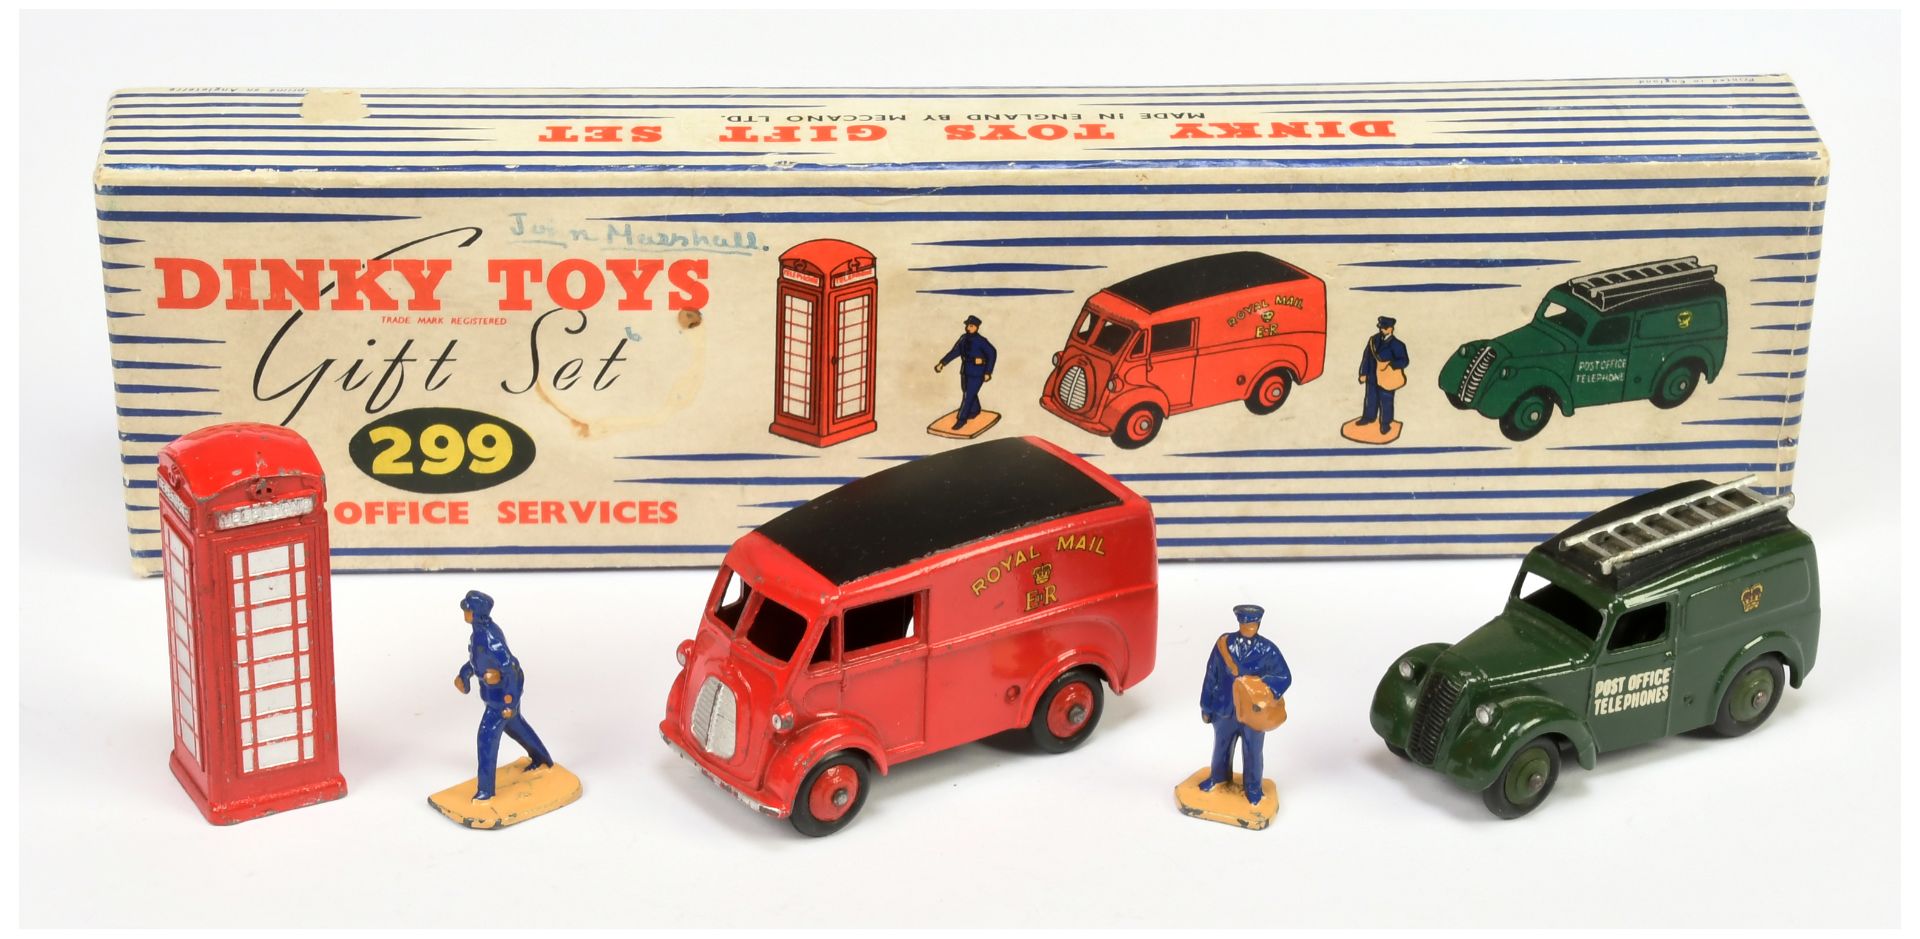 Dinky Toys 299 "Post Office Telephones" Gift set to Include (1) Morris Commercial "Royal Mail" Va...